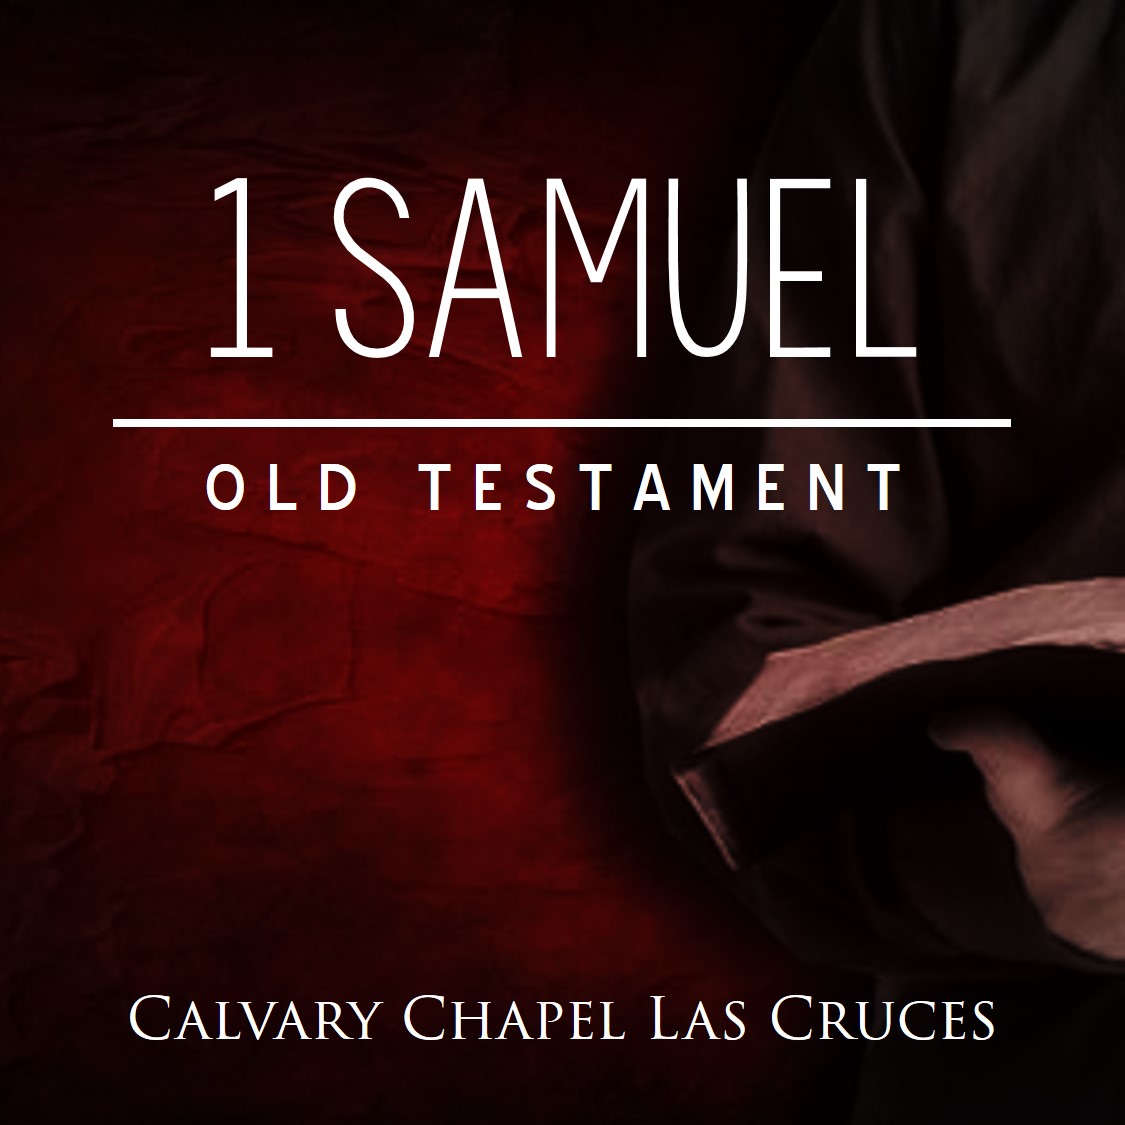 1 Samuel Chapters 11-13 - ”Saul’s Victory, His Coronation, His Mistake”